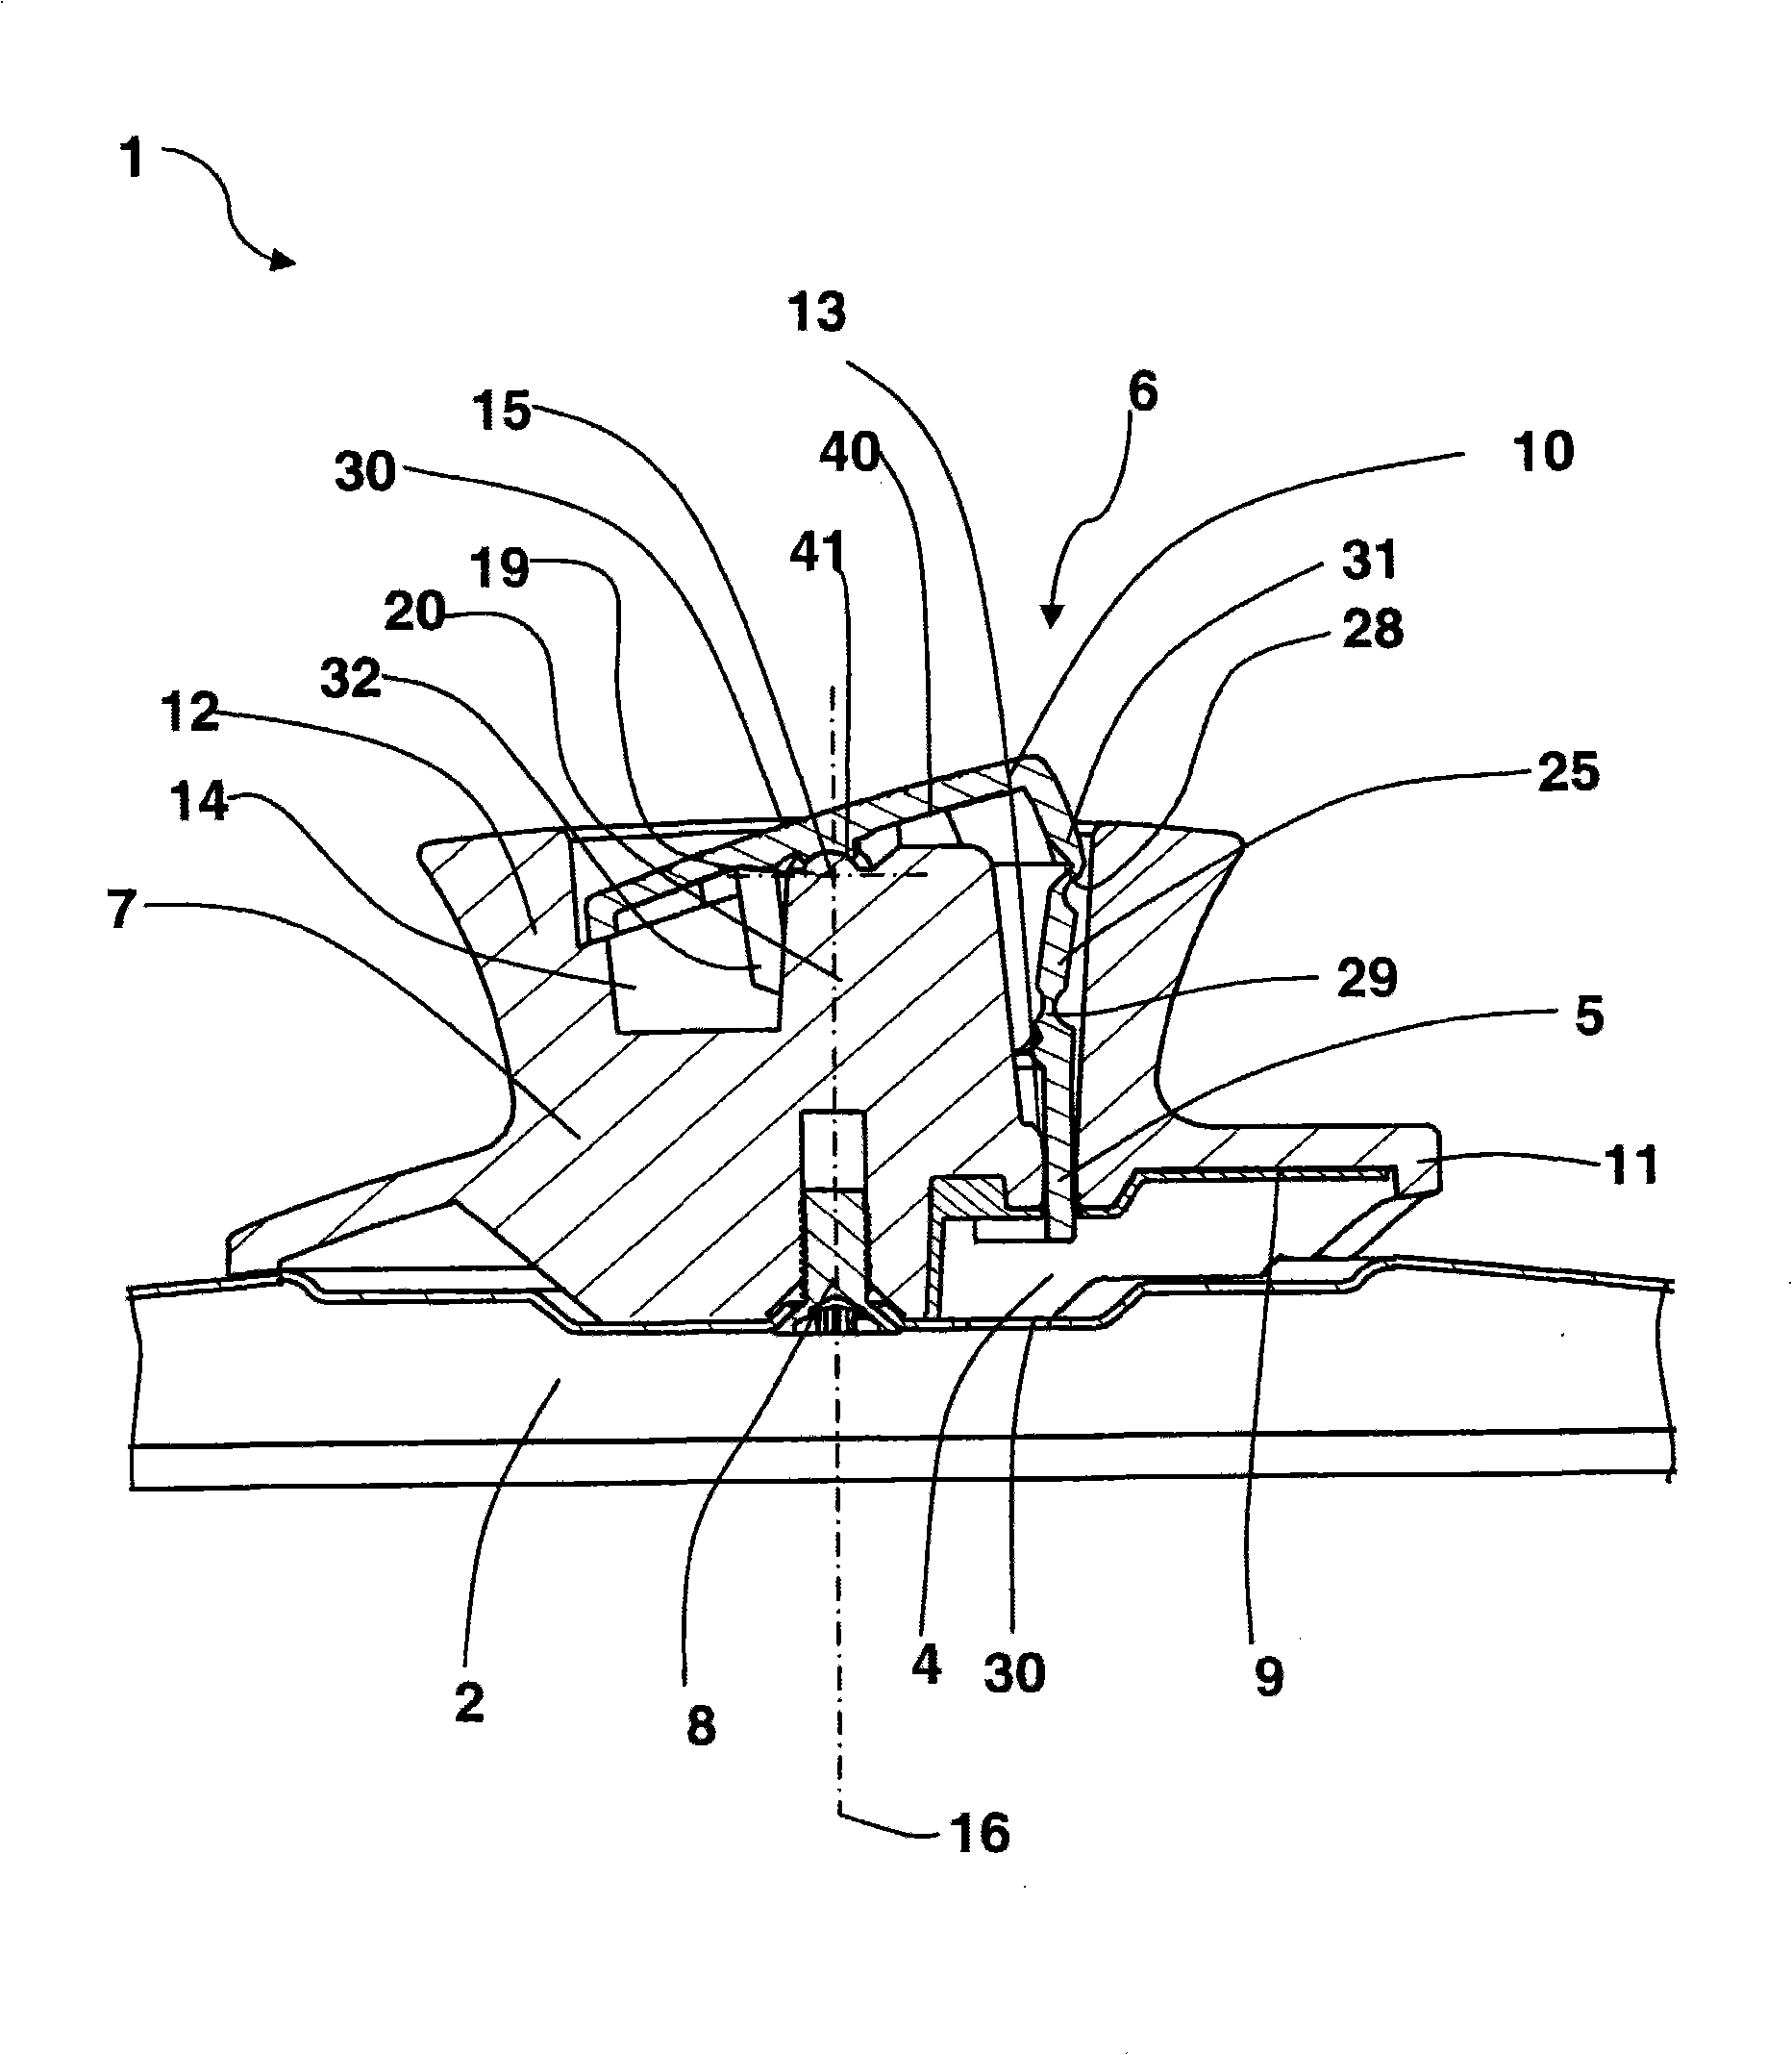 Steam discharge device for a lid of a cooking utensil